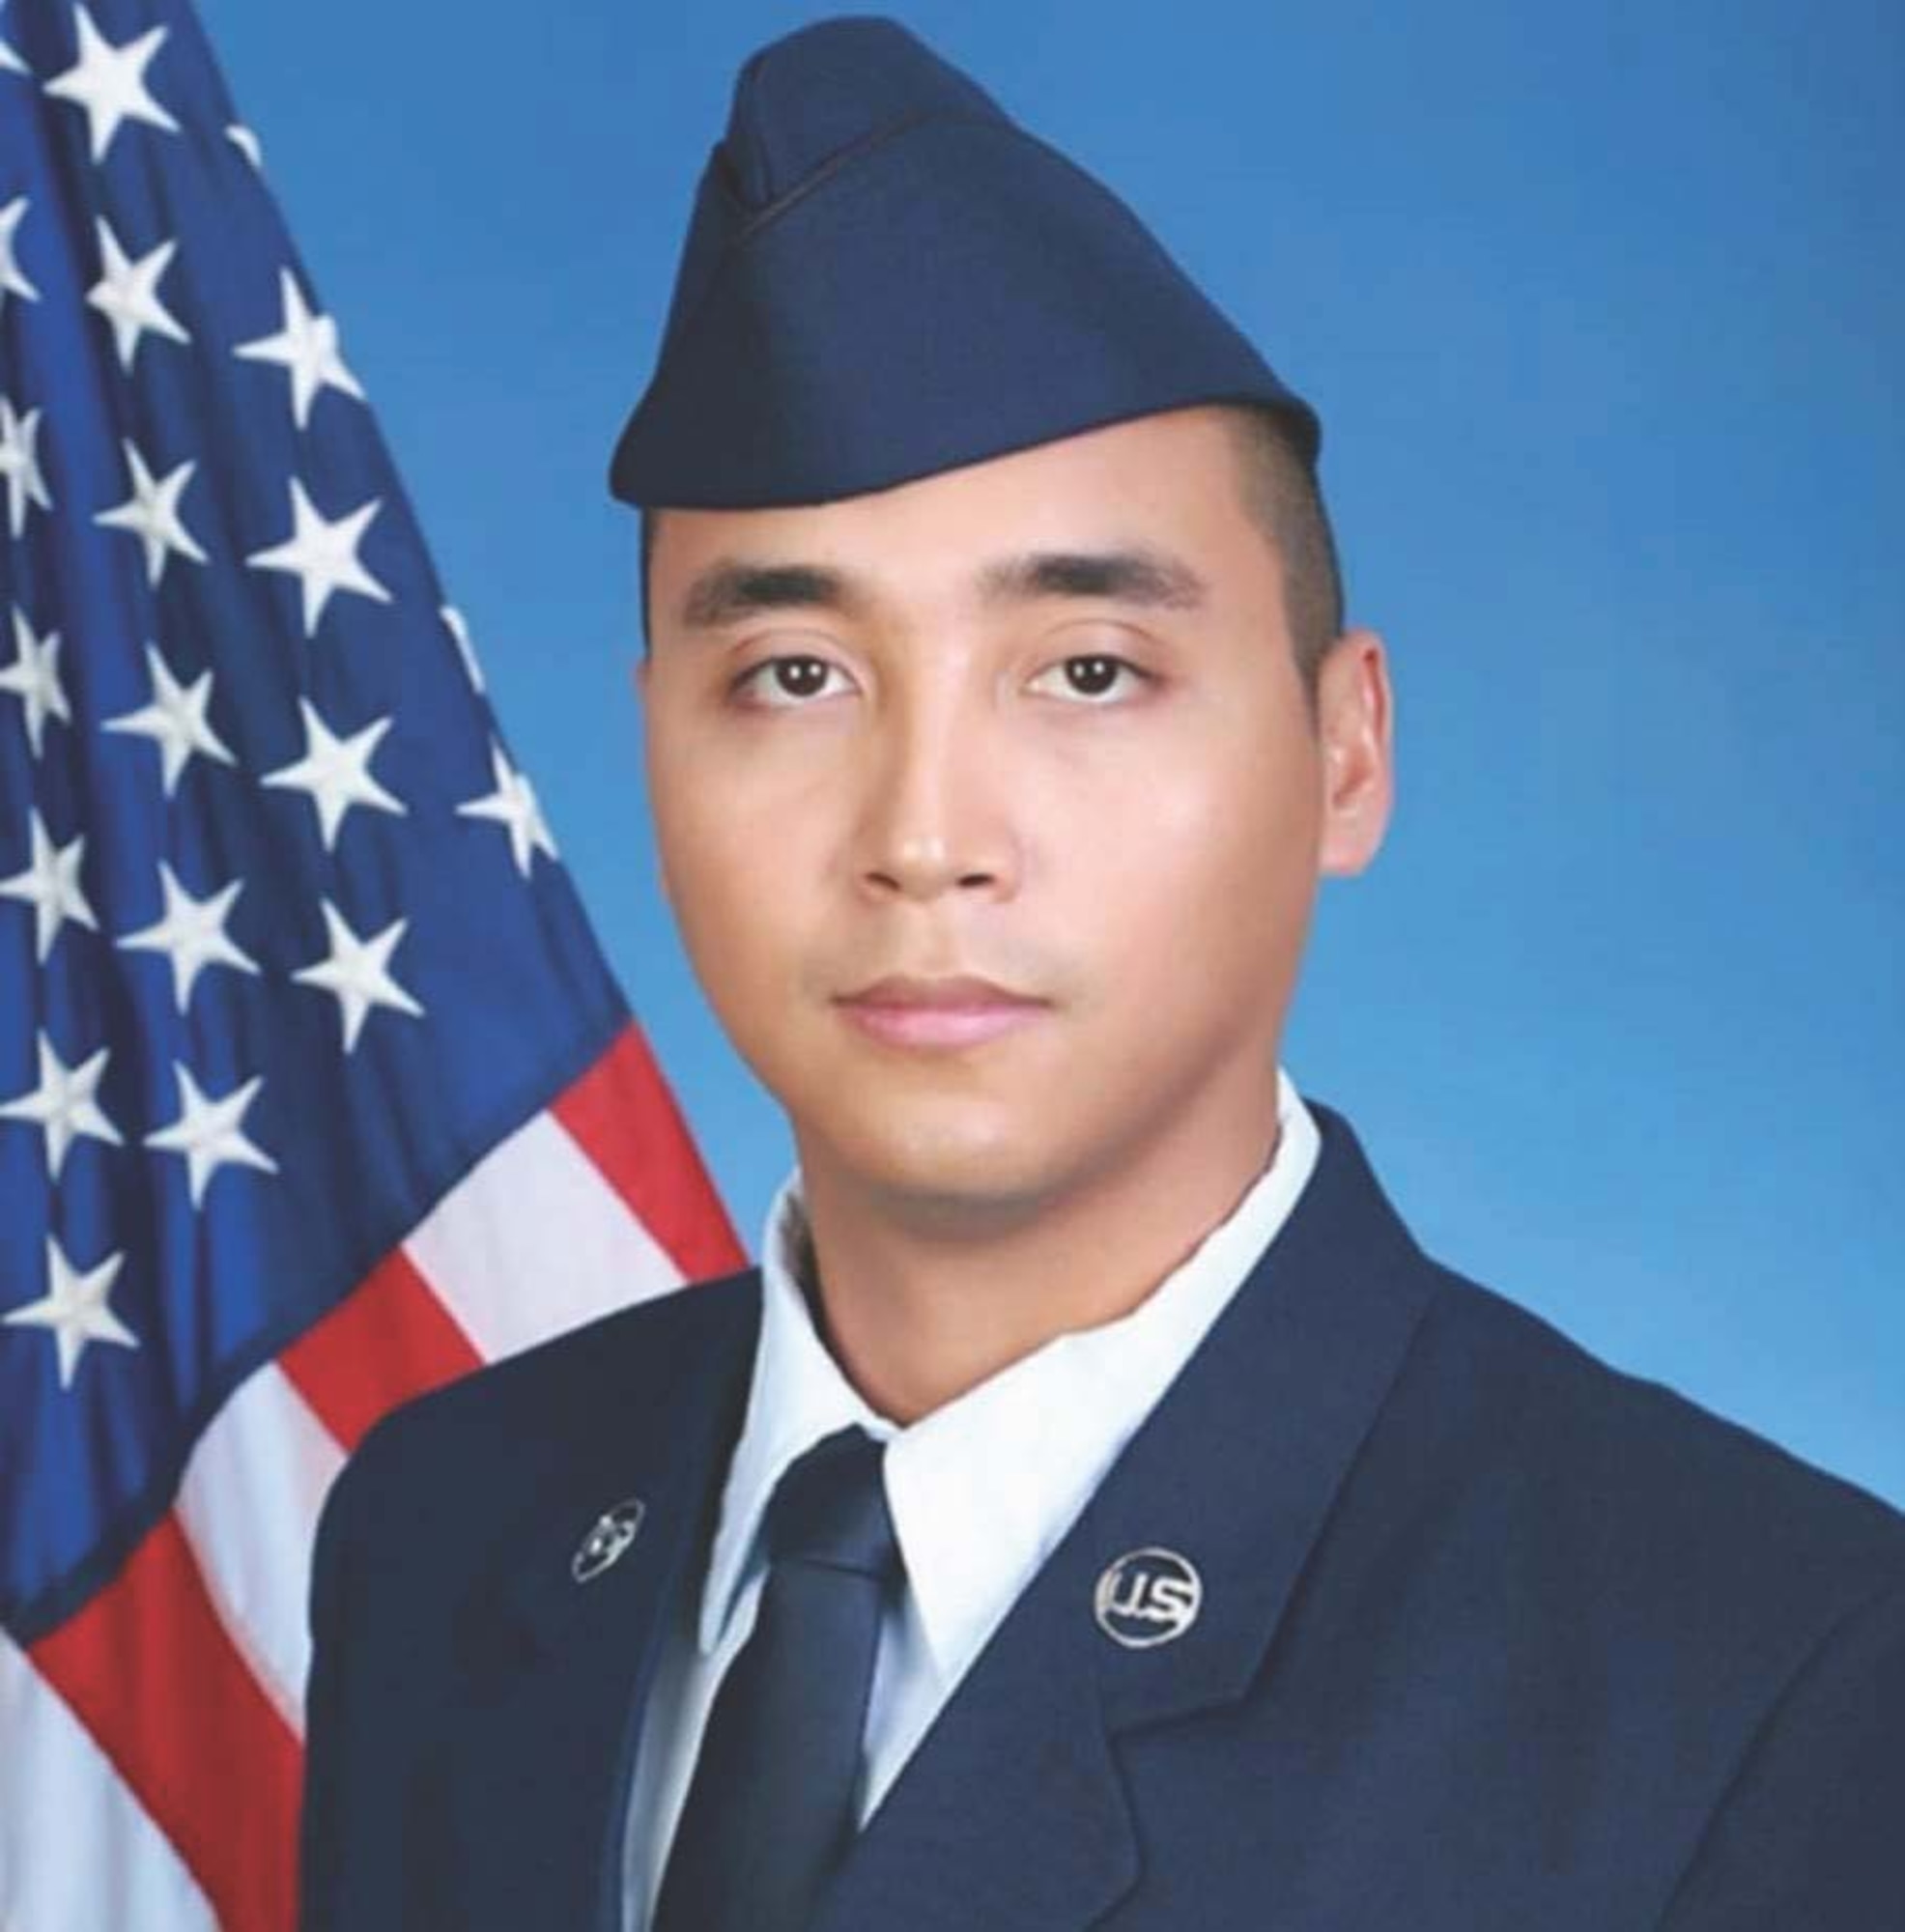 Senior Airman Ryan Diaz, with the 254th Rapid Engineer Deployable Heavy Operational Repair Squadron Engineers, is photographed at Lackland Air Force Base, Texas, Oct. 15, 2018. Diaz, son of Judith Sanchez, a 36th Wing program analyst,  joined the Guam Air National Guard after being inspired by his mother’s 25 years of civilian military service. (Photo courtesy of Judith Sanchez)